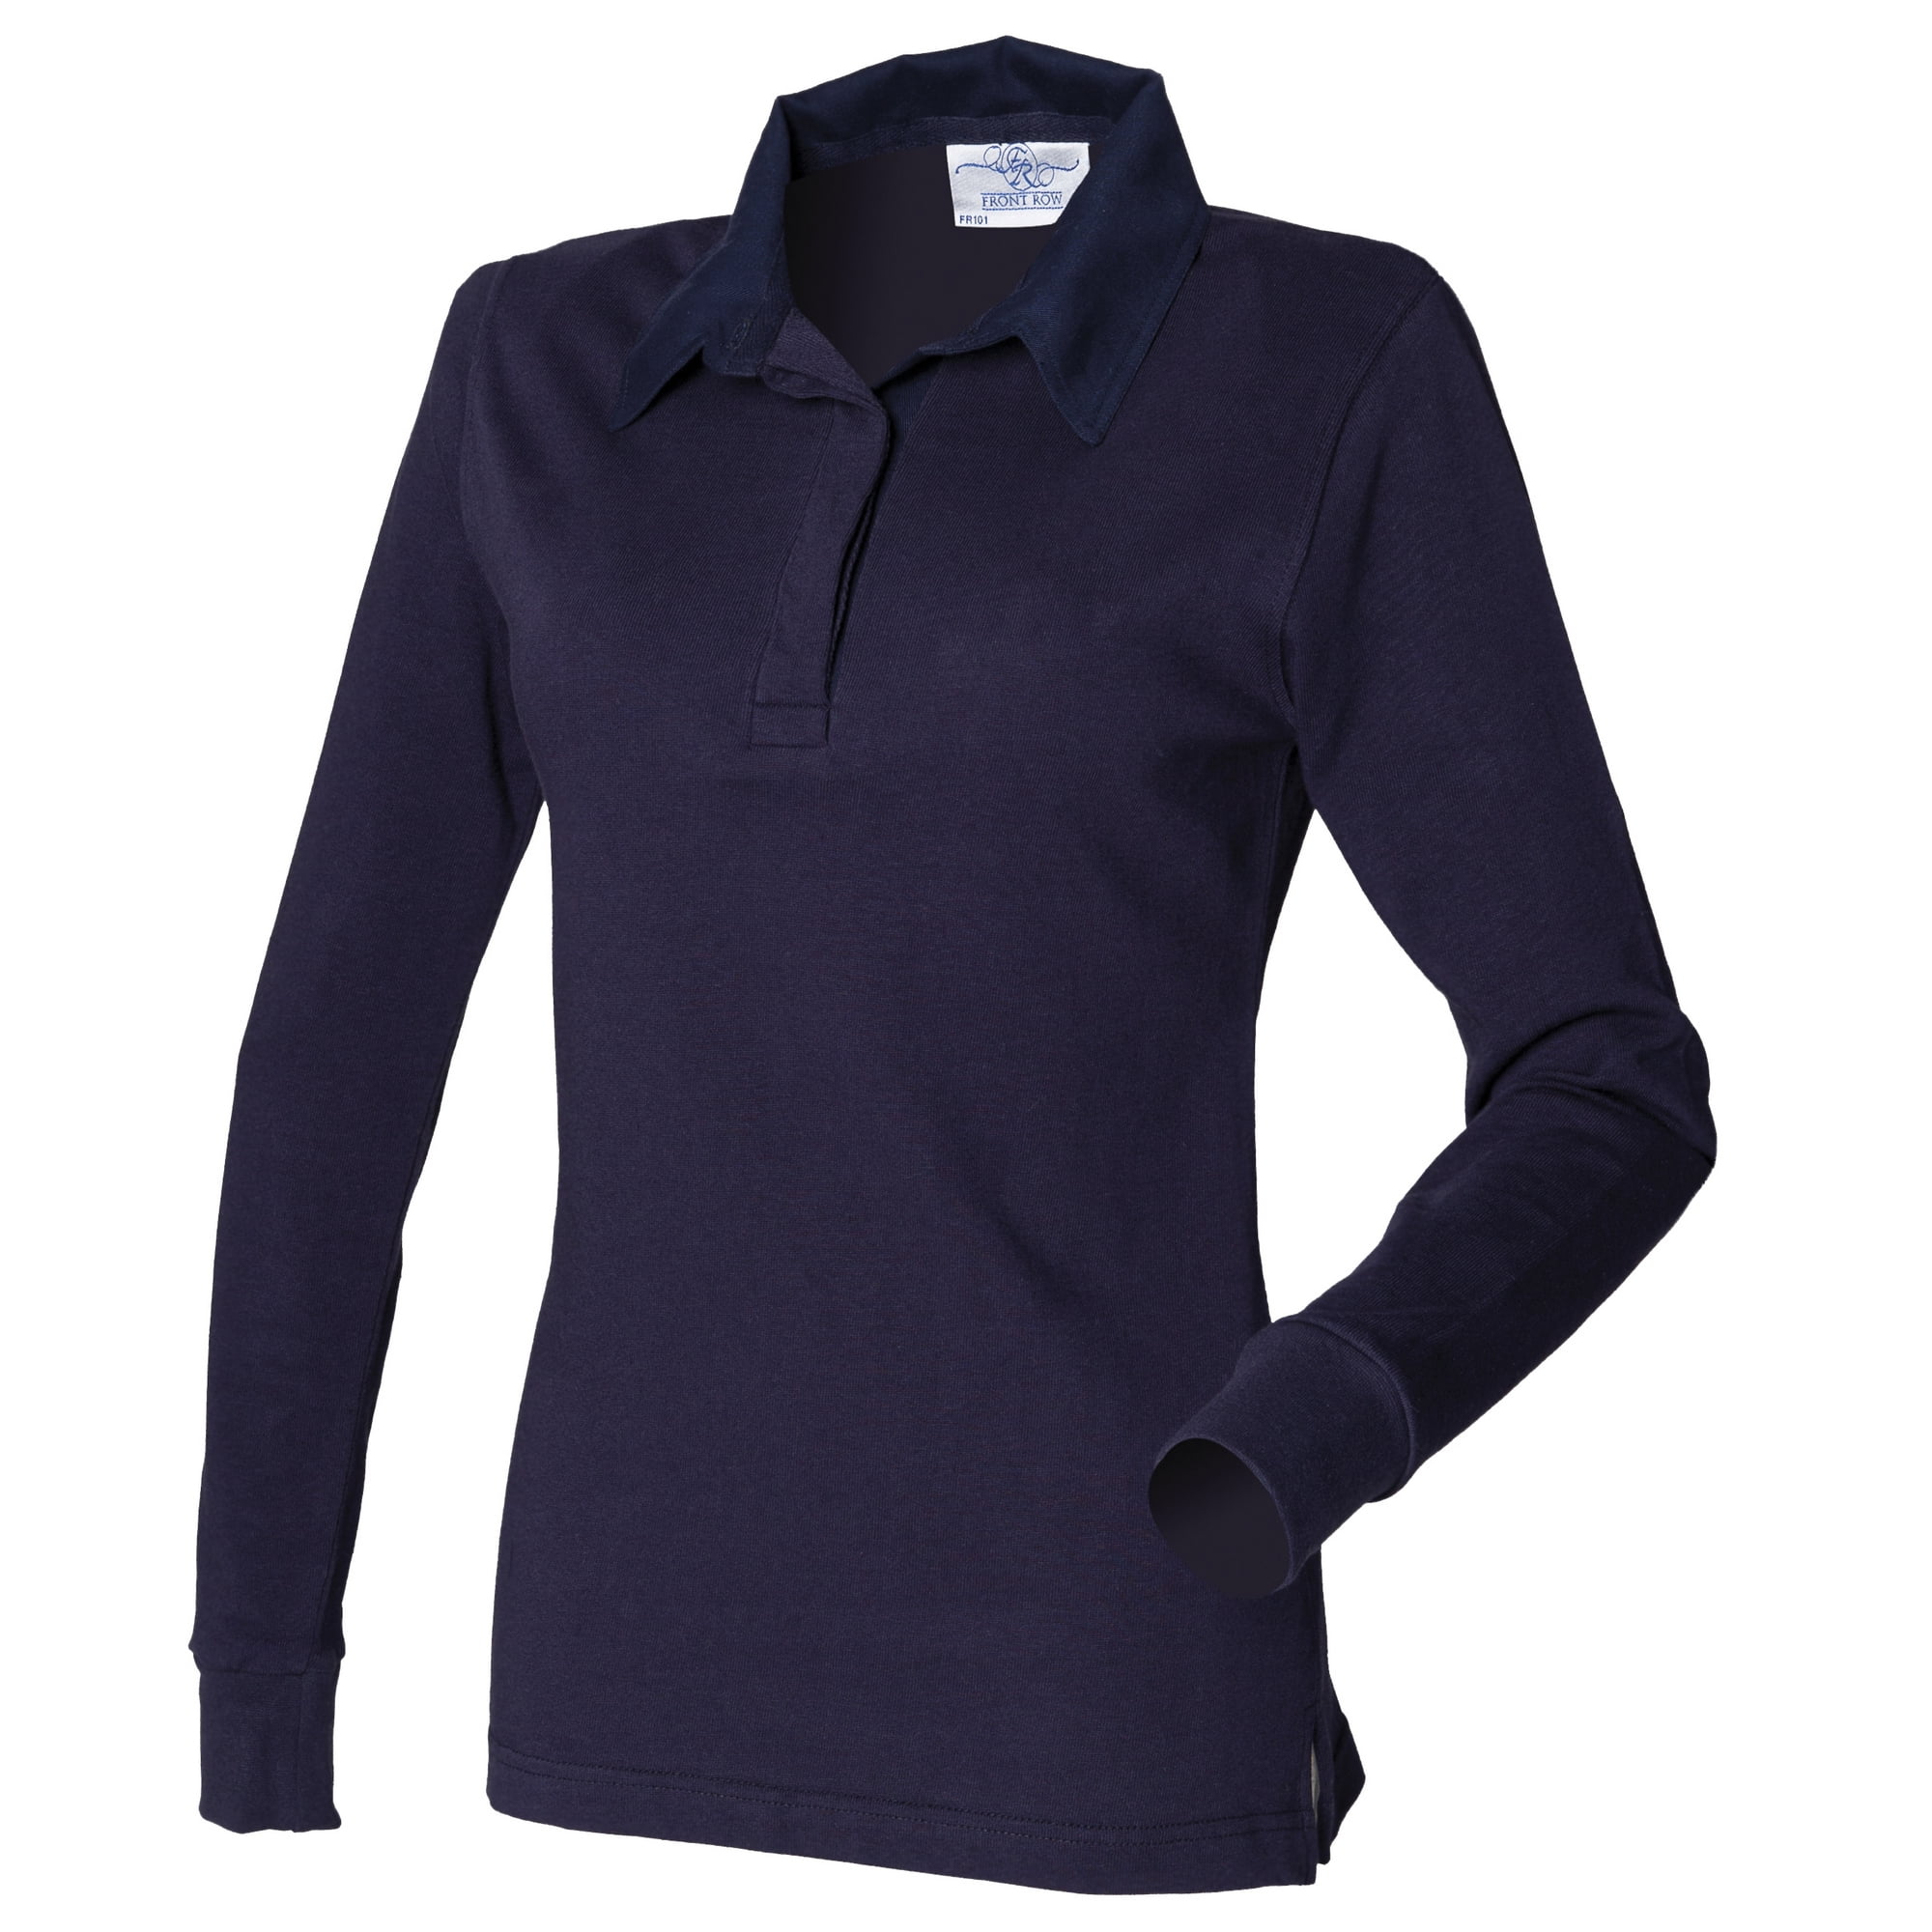 women's long sleeve rugby polo